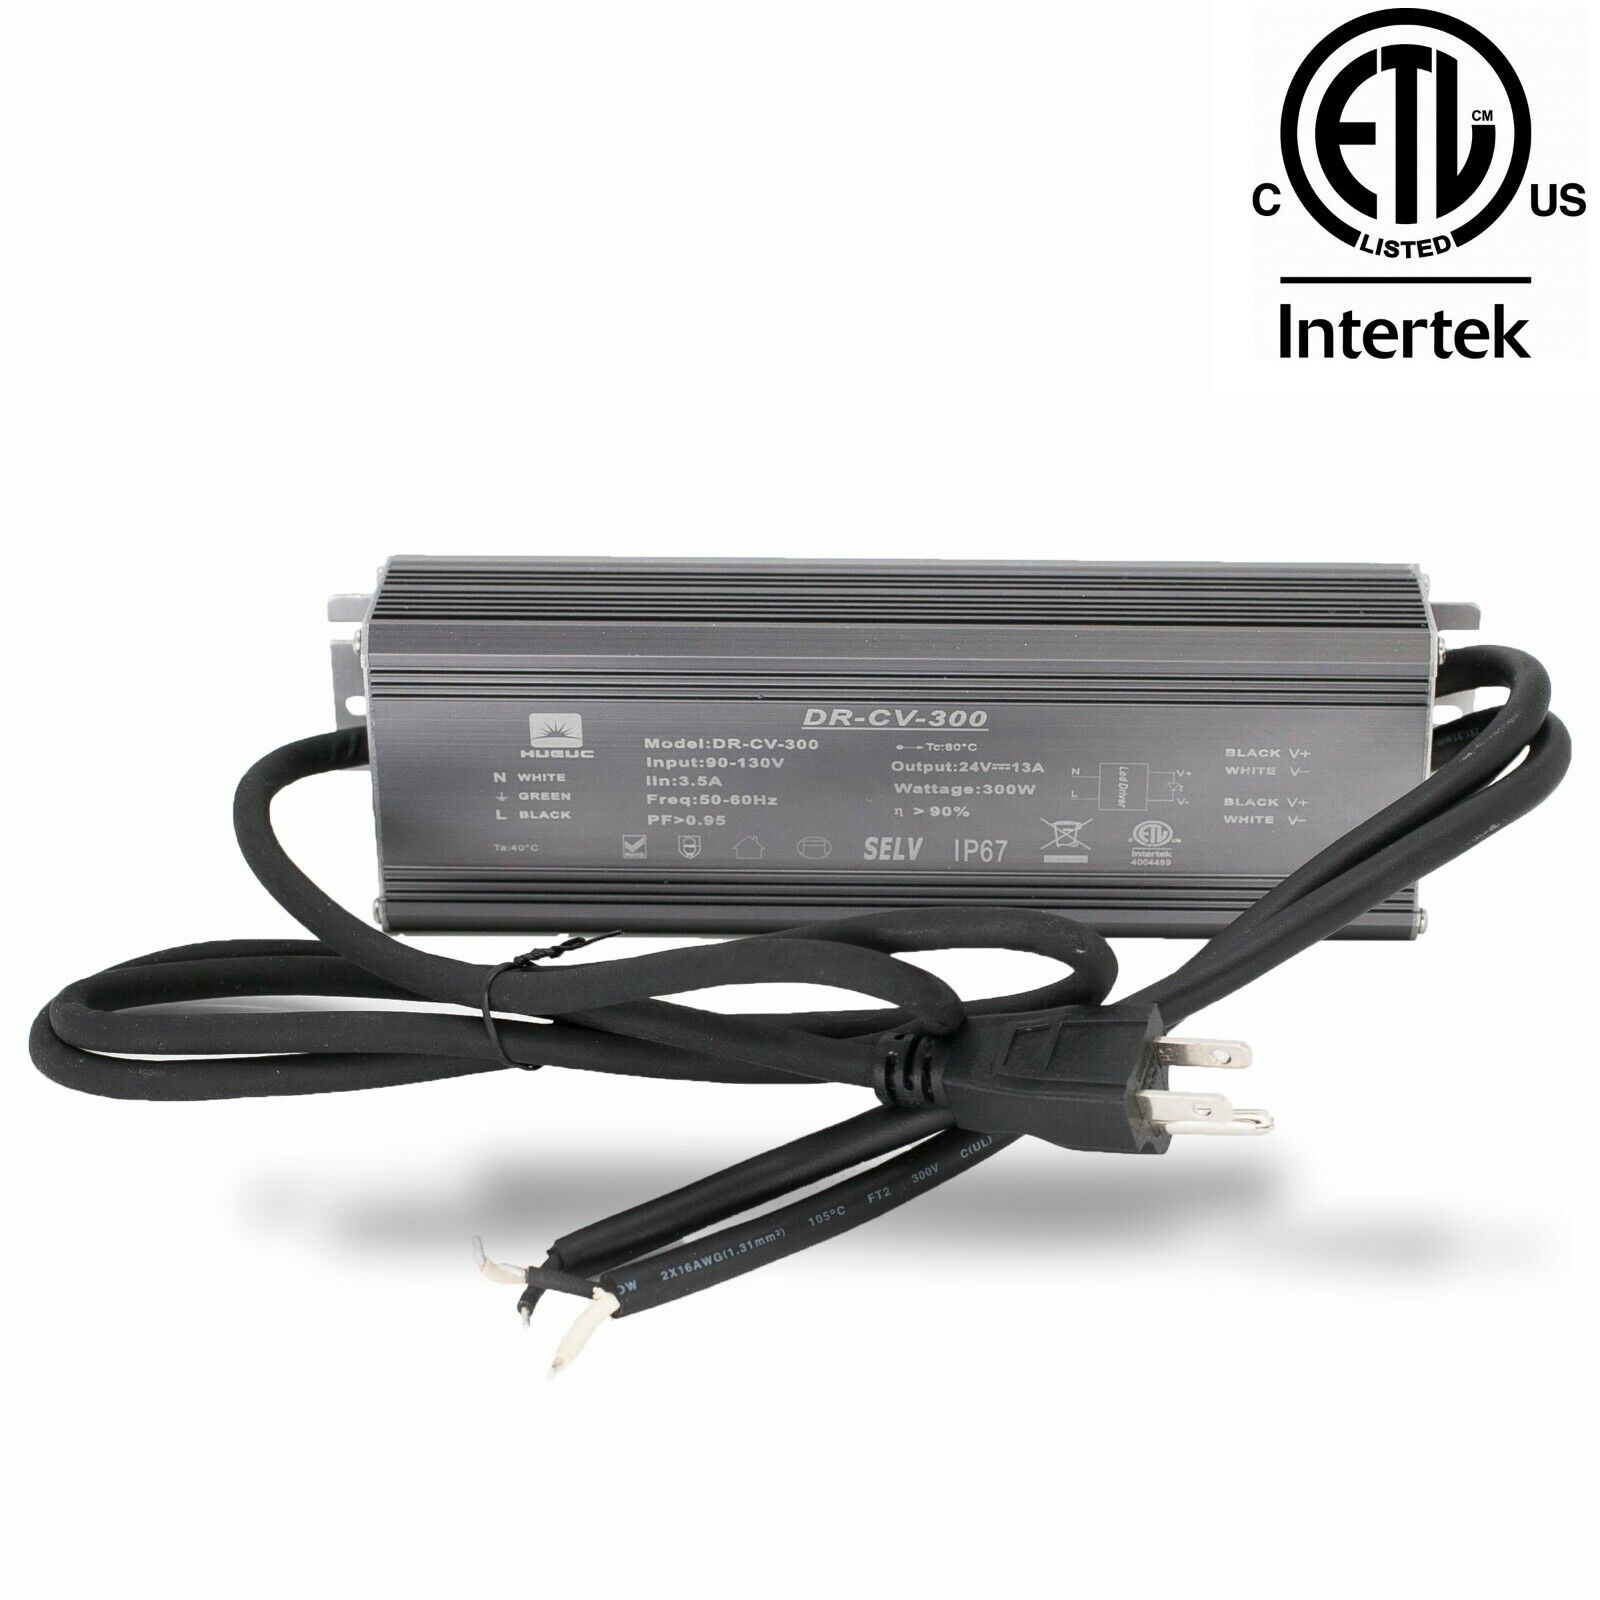 *Brand NEW* ETL LISTED 24v 12.5A 300w LED Light Power Supply Driver Waterproof + AC Plug - Click Image to Close